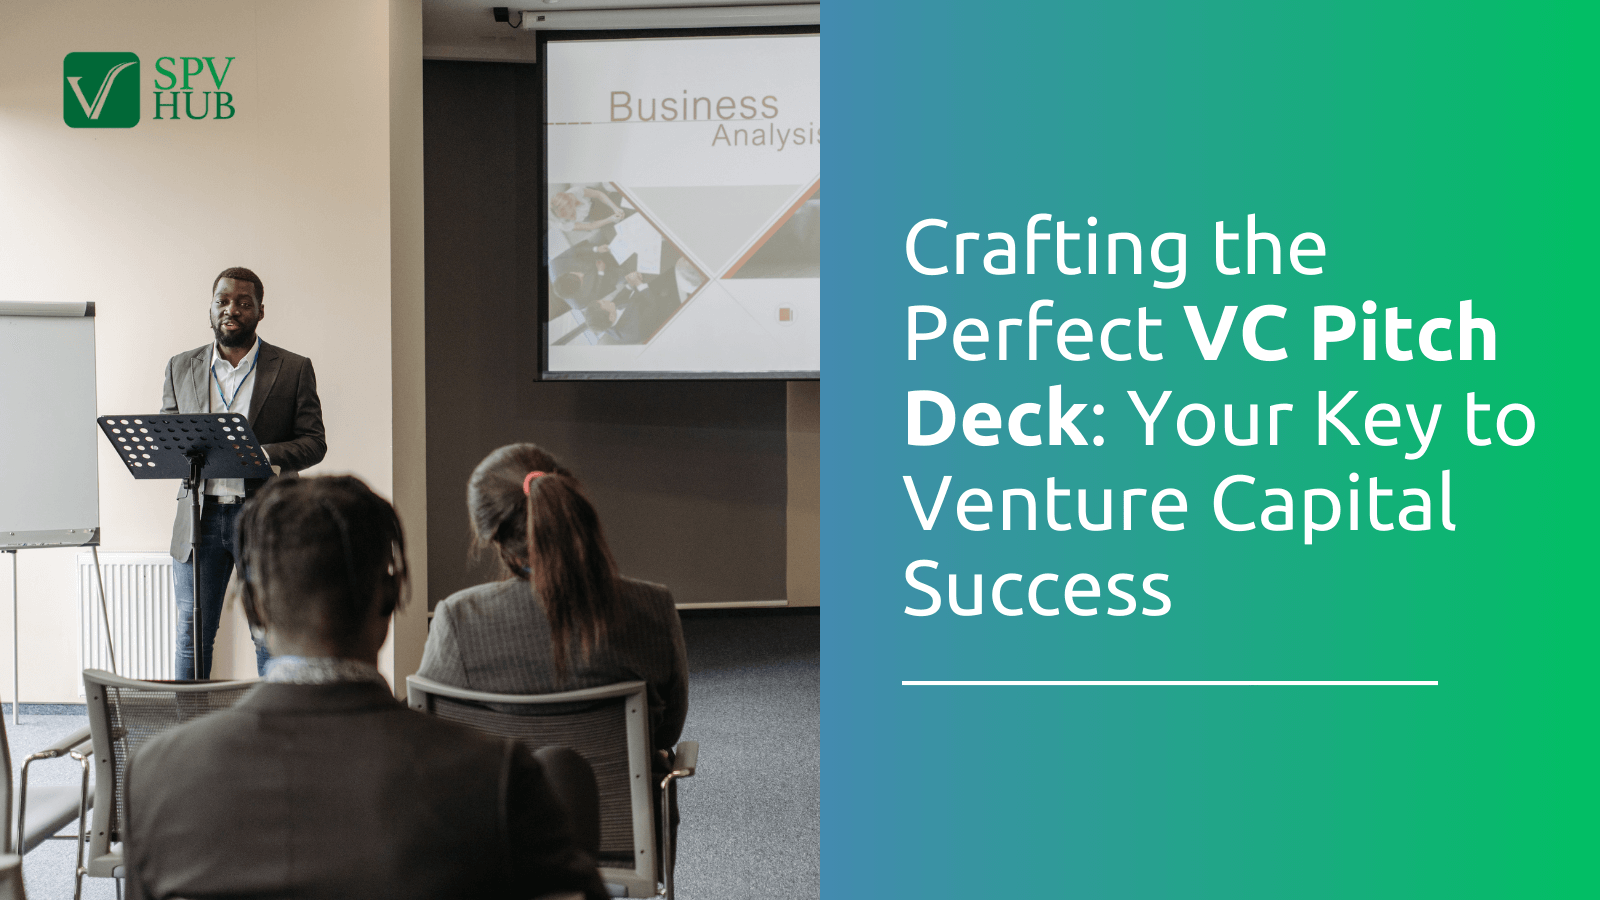 Crafting the Perfect VC Pitch Deck: Your Key to Venture Capital Success